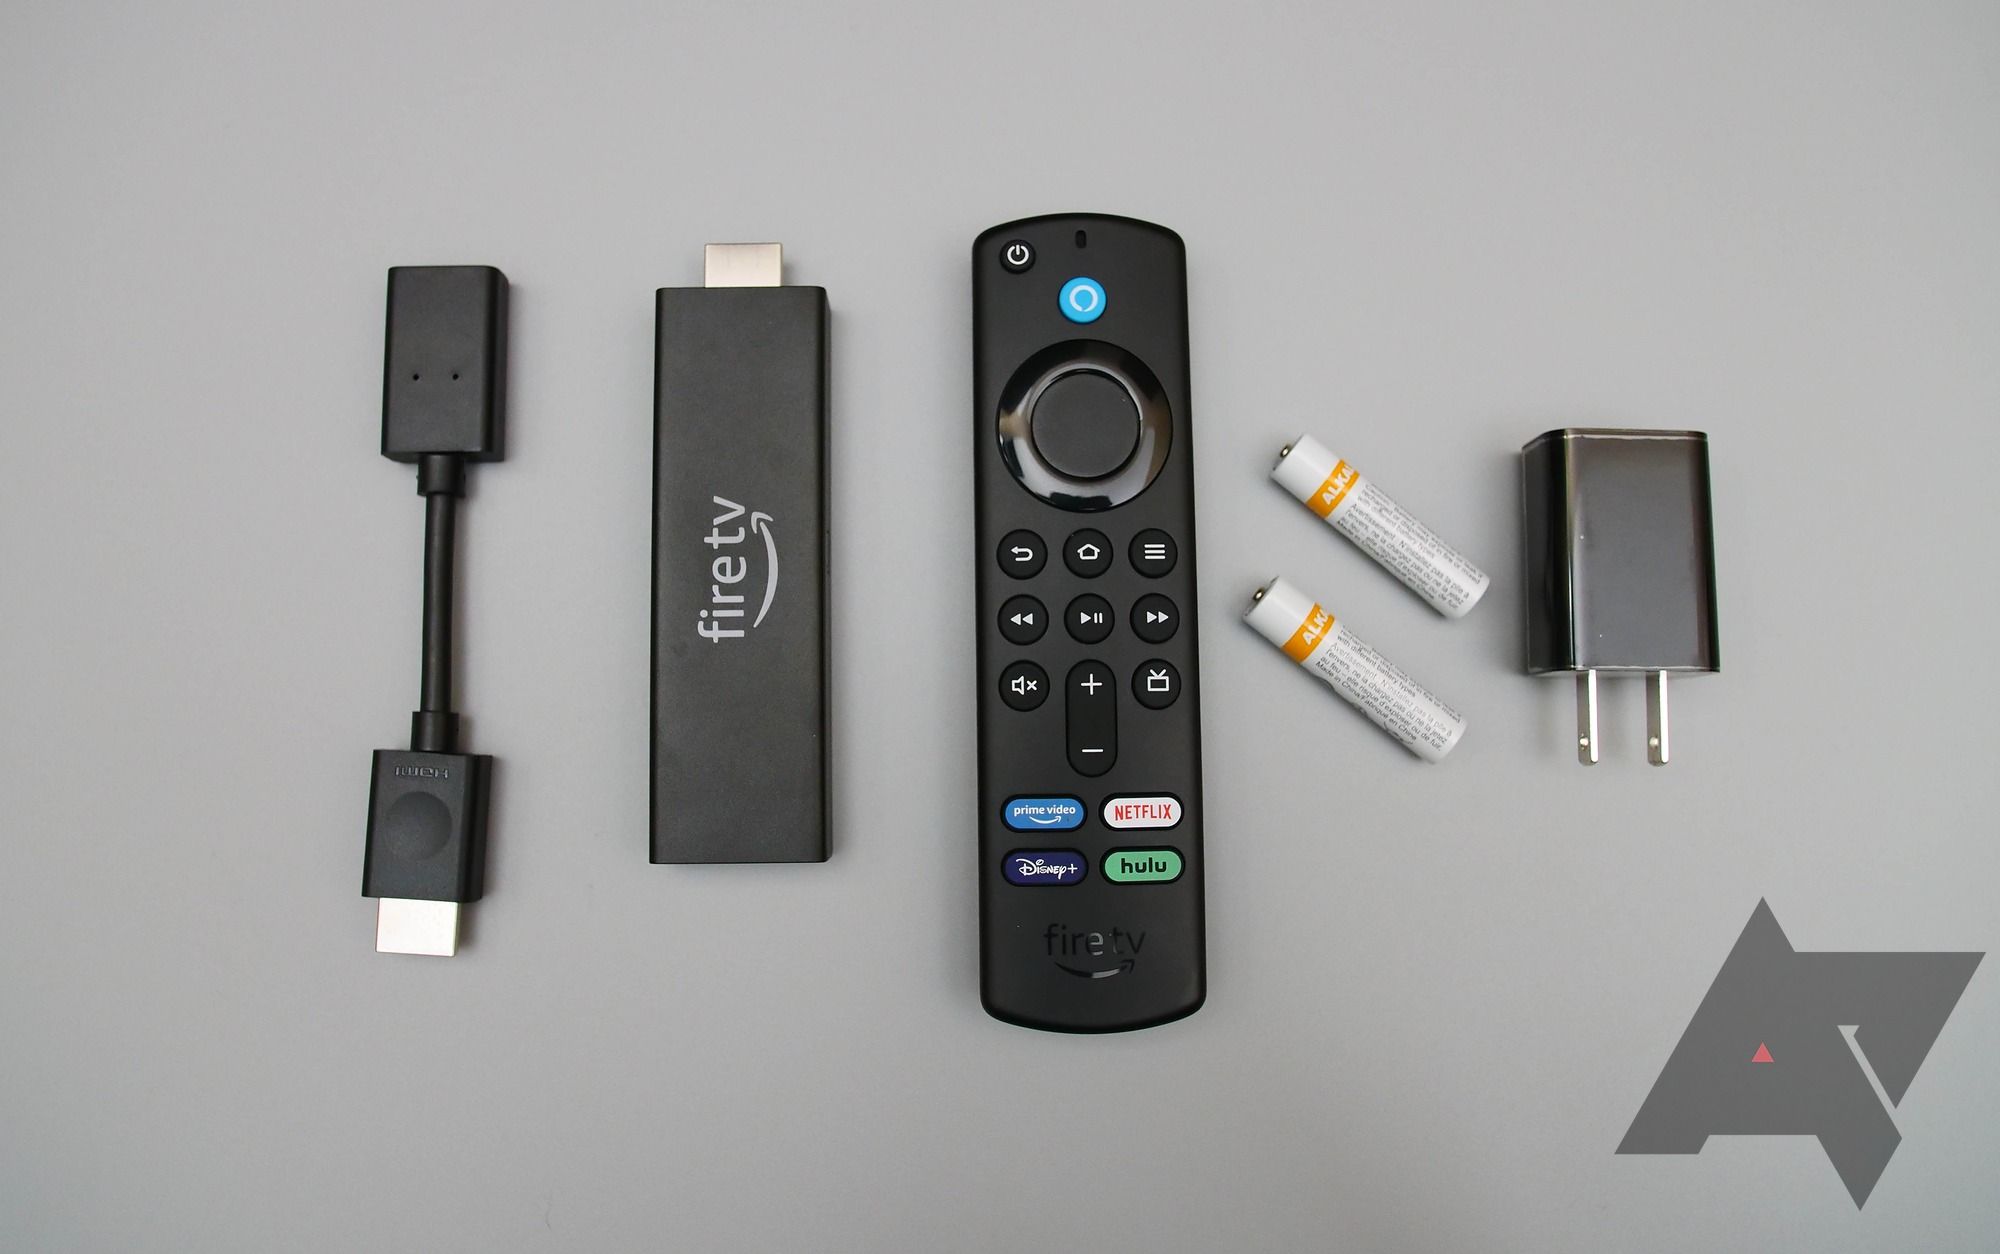   Fire TV Stick 4K Max with USB Power Cable